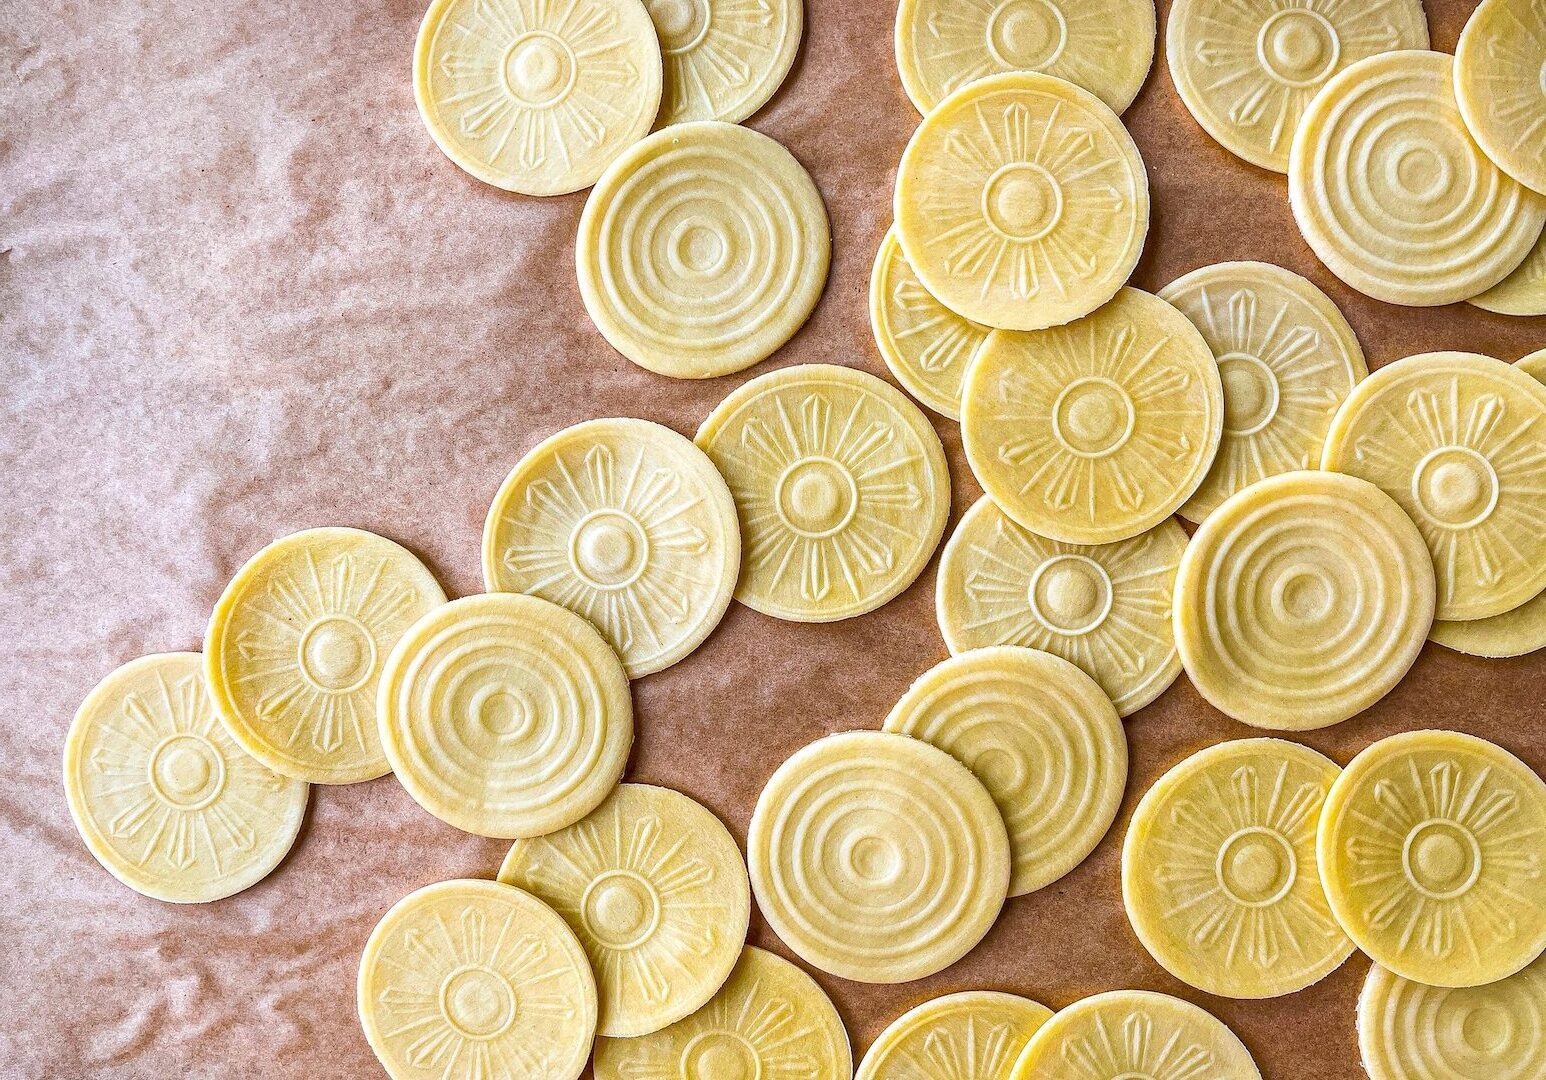 Round pasta medallions are spread out across parchment paper. Each pasta medallion, known as "corzetti", as a patterned design.